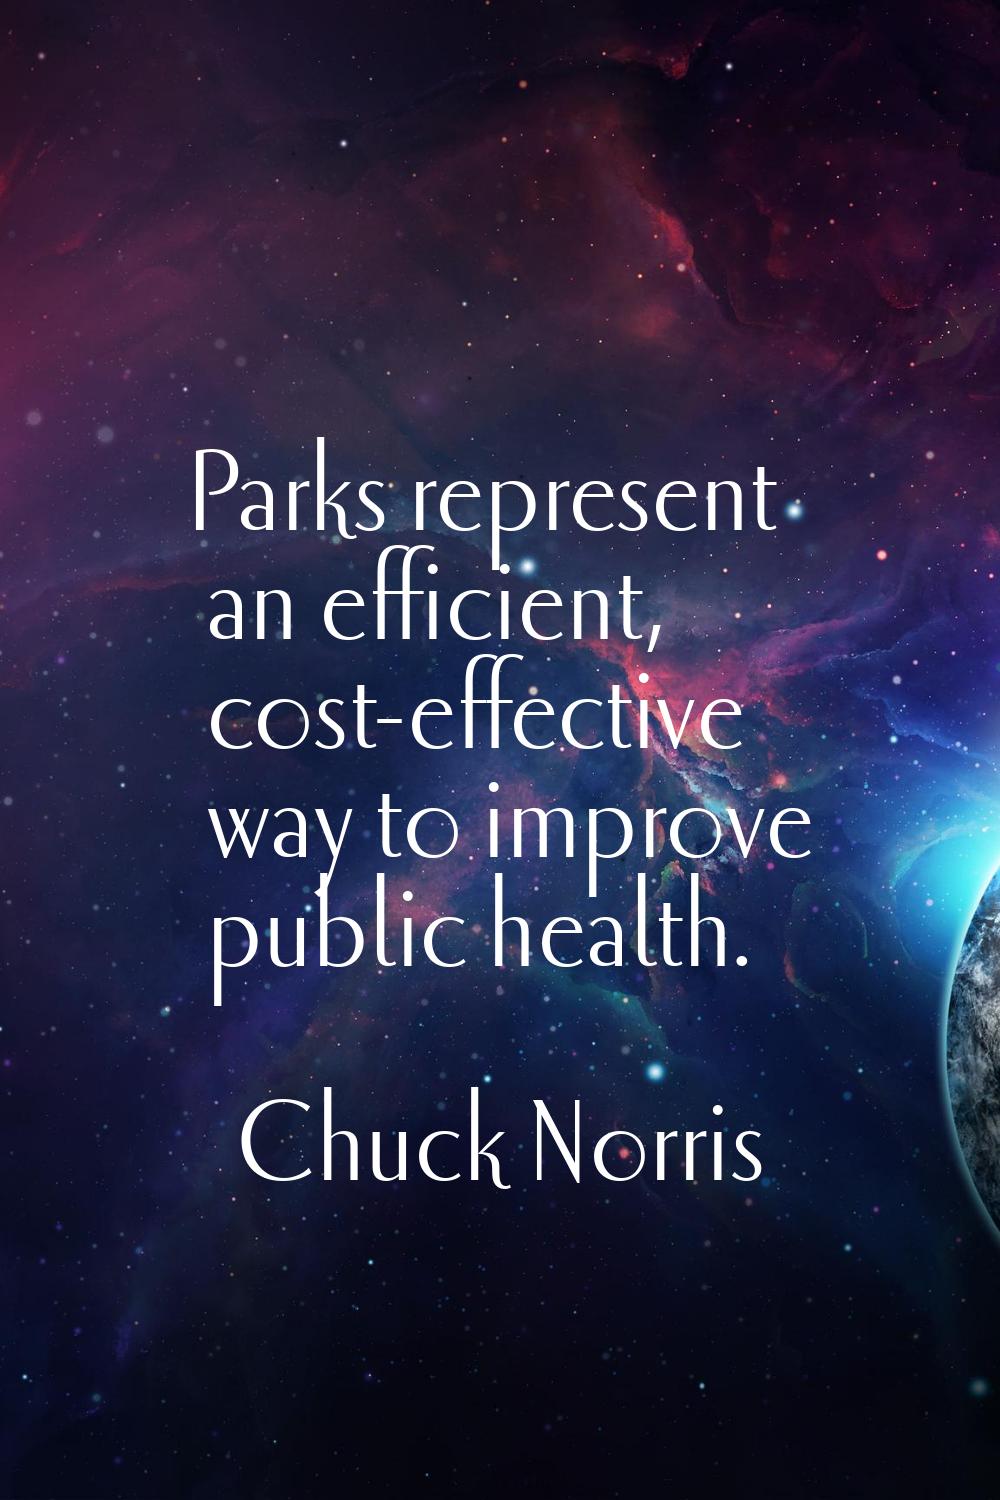 Parks represent an efficient, cost-effective way to improve public health.